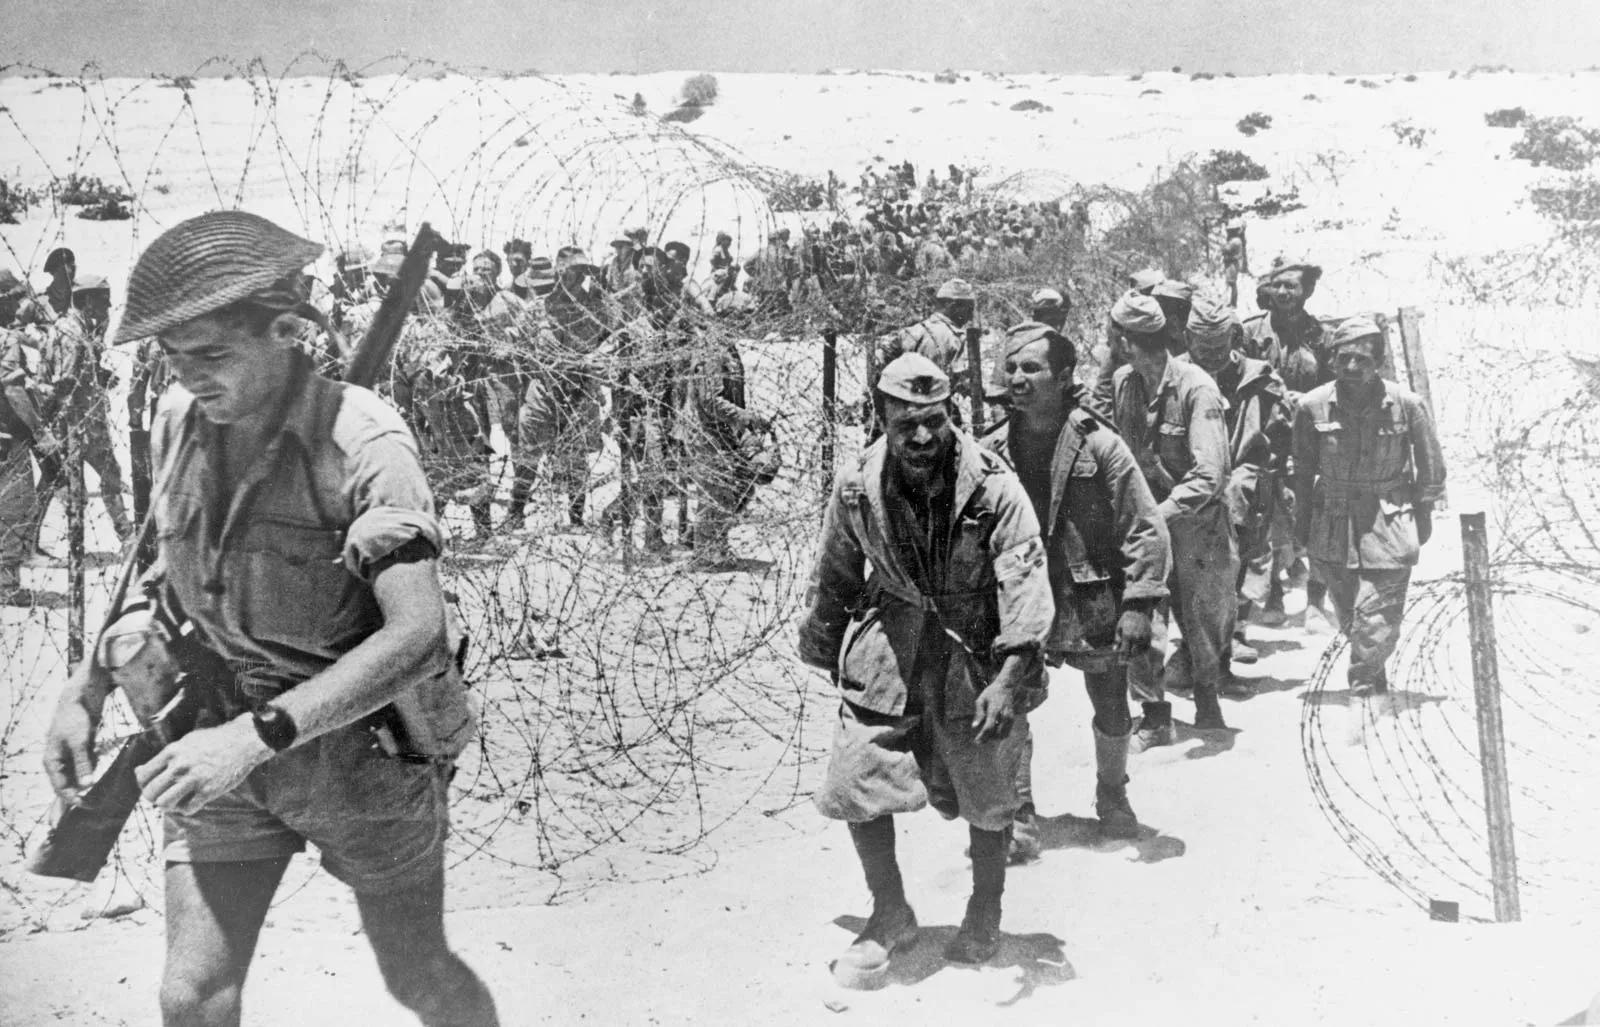 Italian prisoners of war being led into a barbed-wire enclosure after the Second Battle of El-Alamein November 1942 - courtesy of Britannica